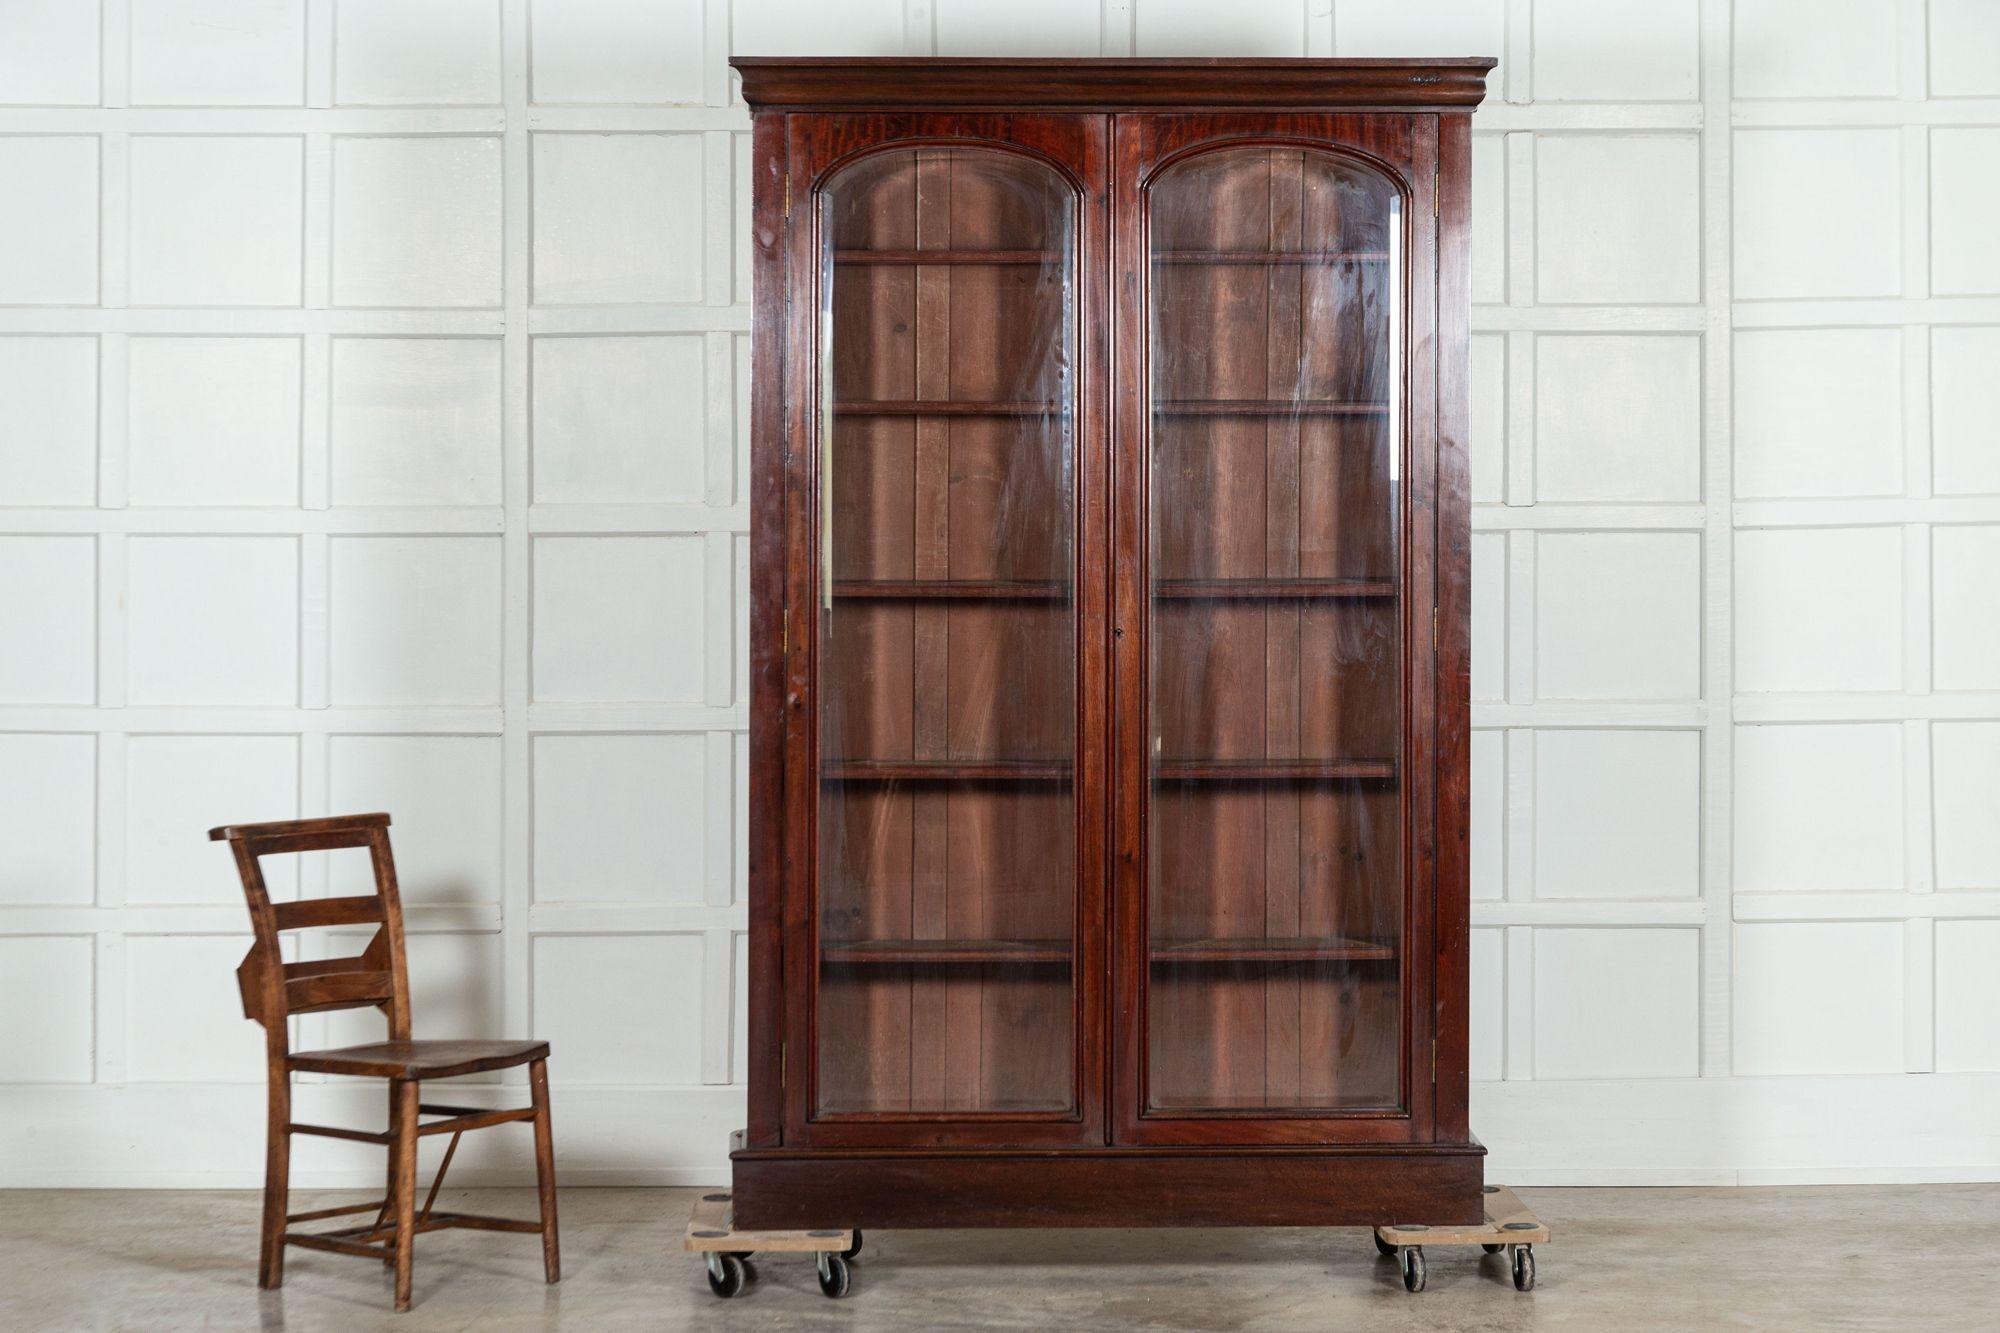 19th Century English Mahogany Arched Glazed Bookcase In Good Condition For Sale In Staffordshire, GB